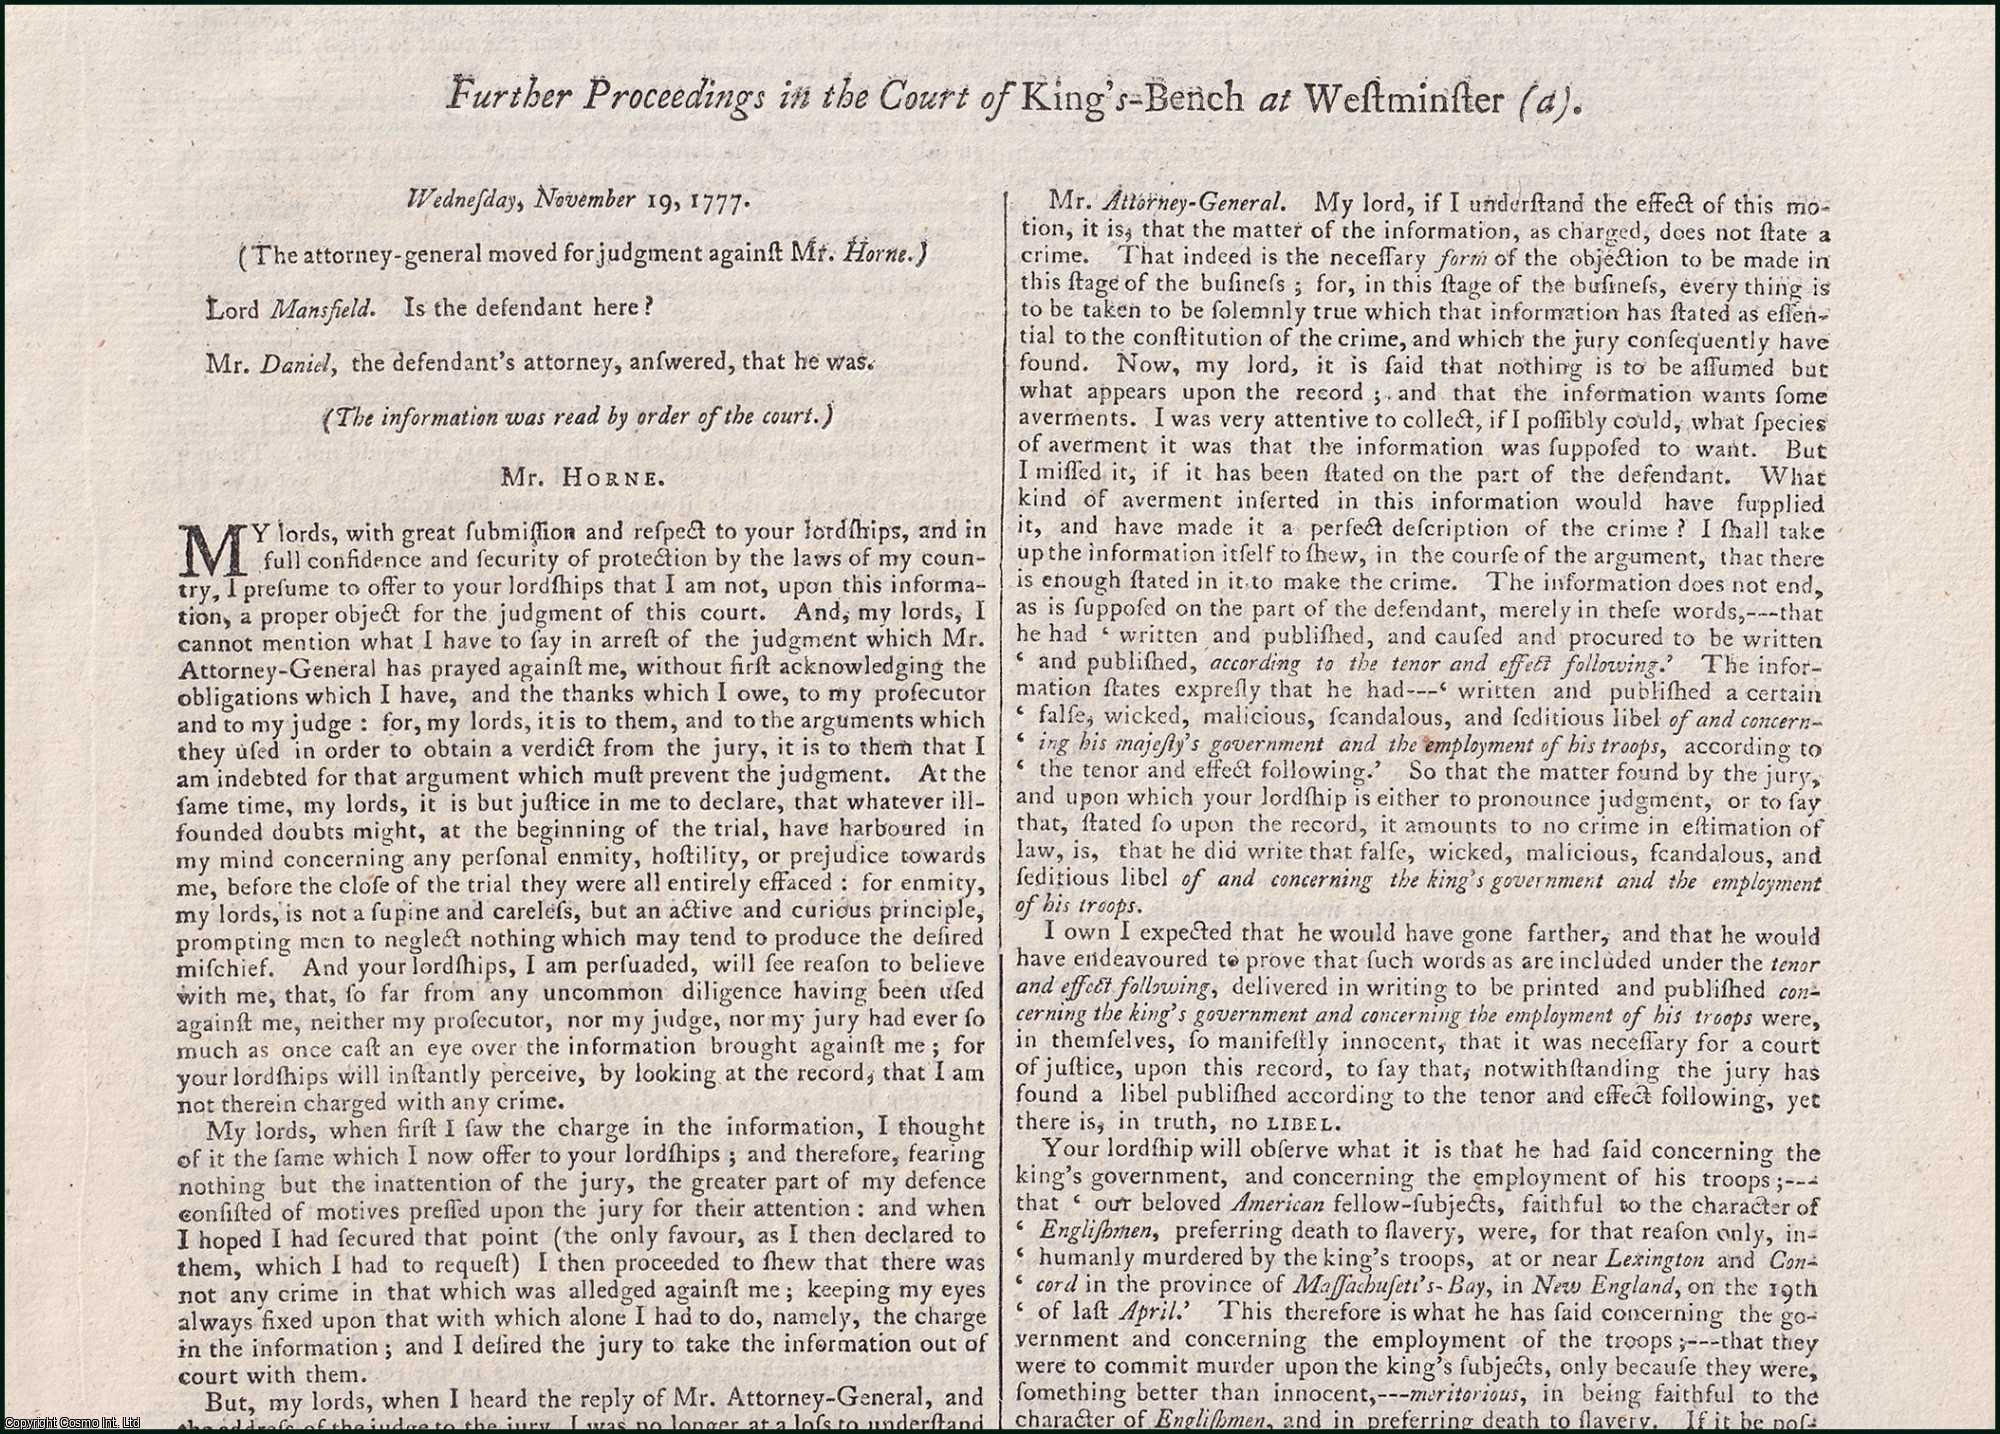 [Trial]. - Further Proceedings in the Court of King's-Bench at Westminster, 1777. An original report from the Collected State Trials.